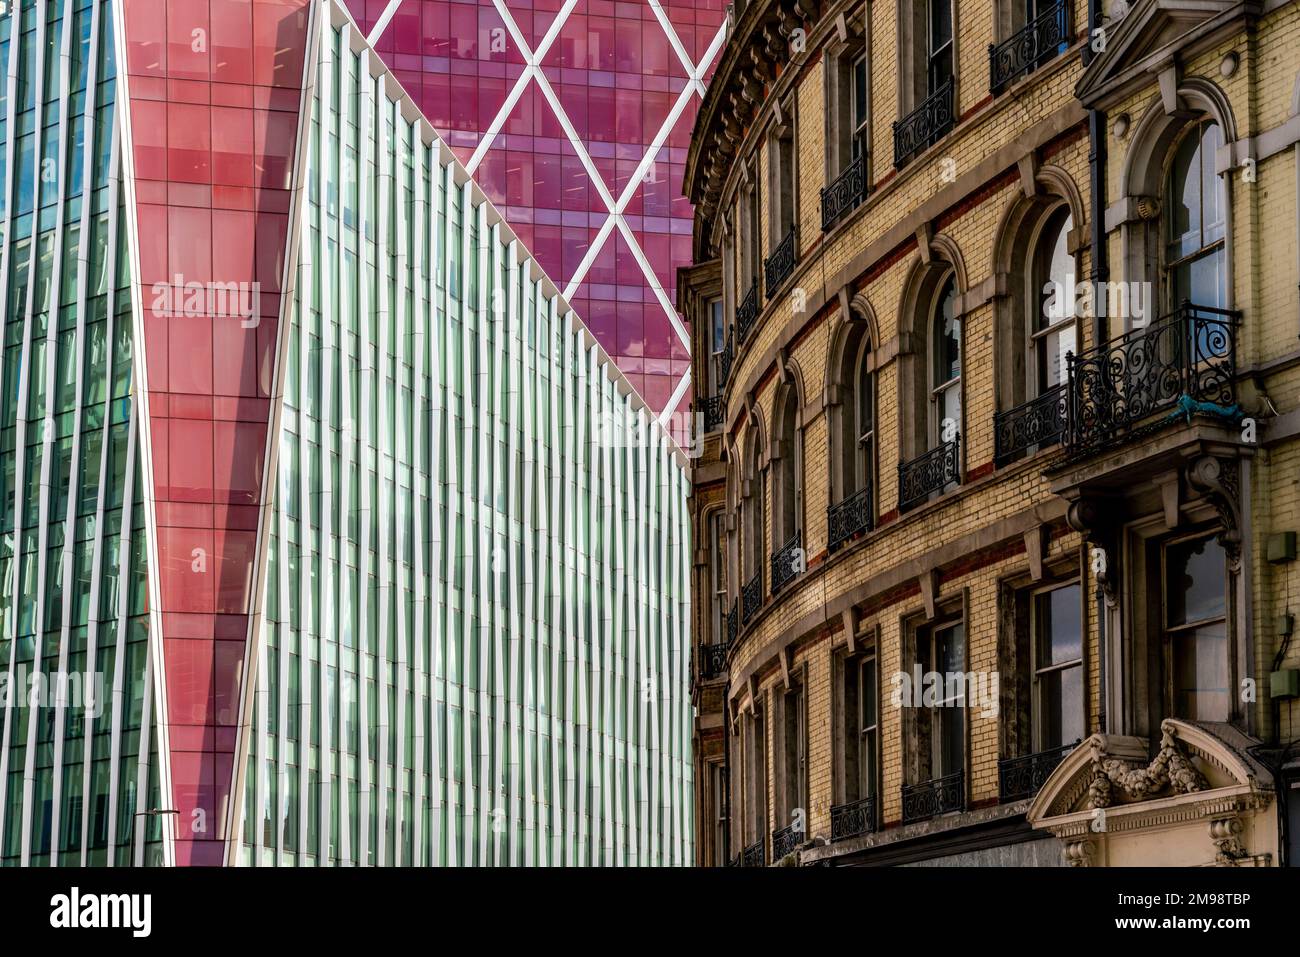 Old and New Architecture, Victoria Station Area, London, Großbritannien. Stockfoto